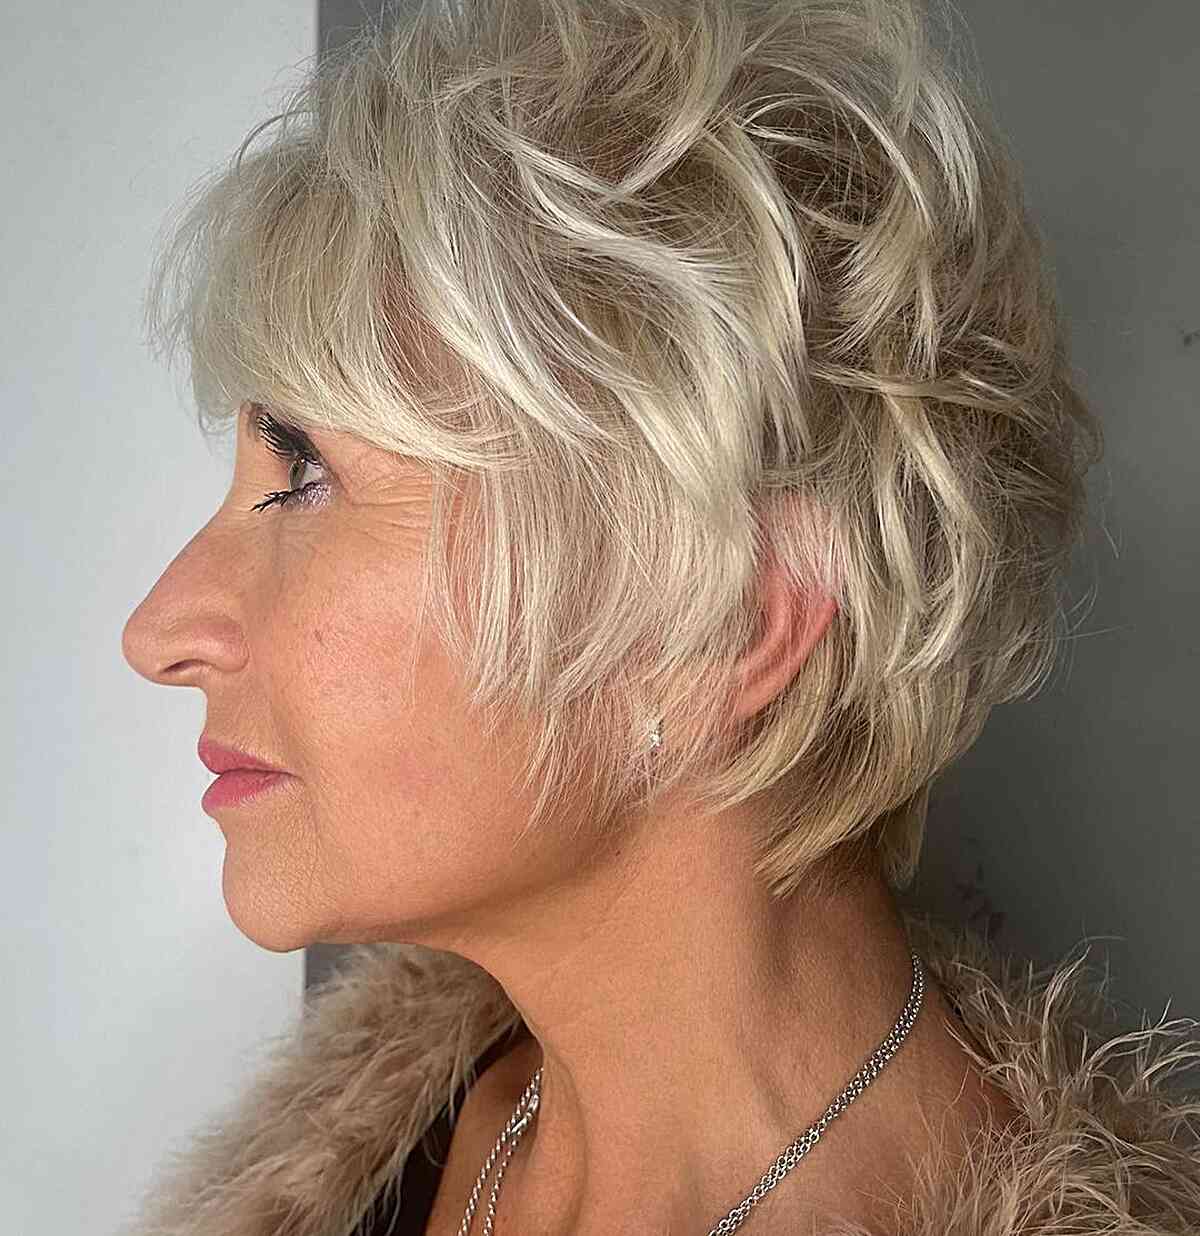 Balayage on a Feathered Cut for an Old Lady